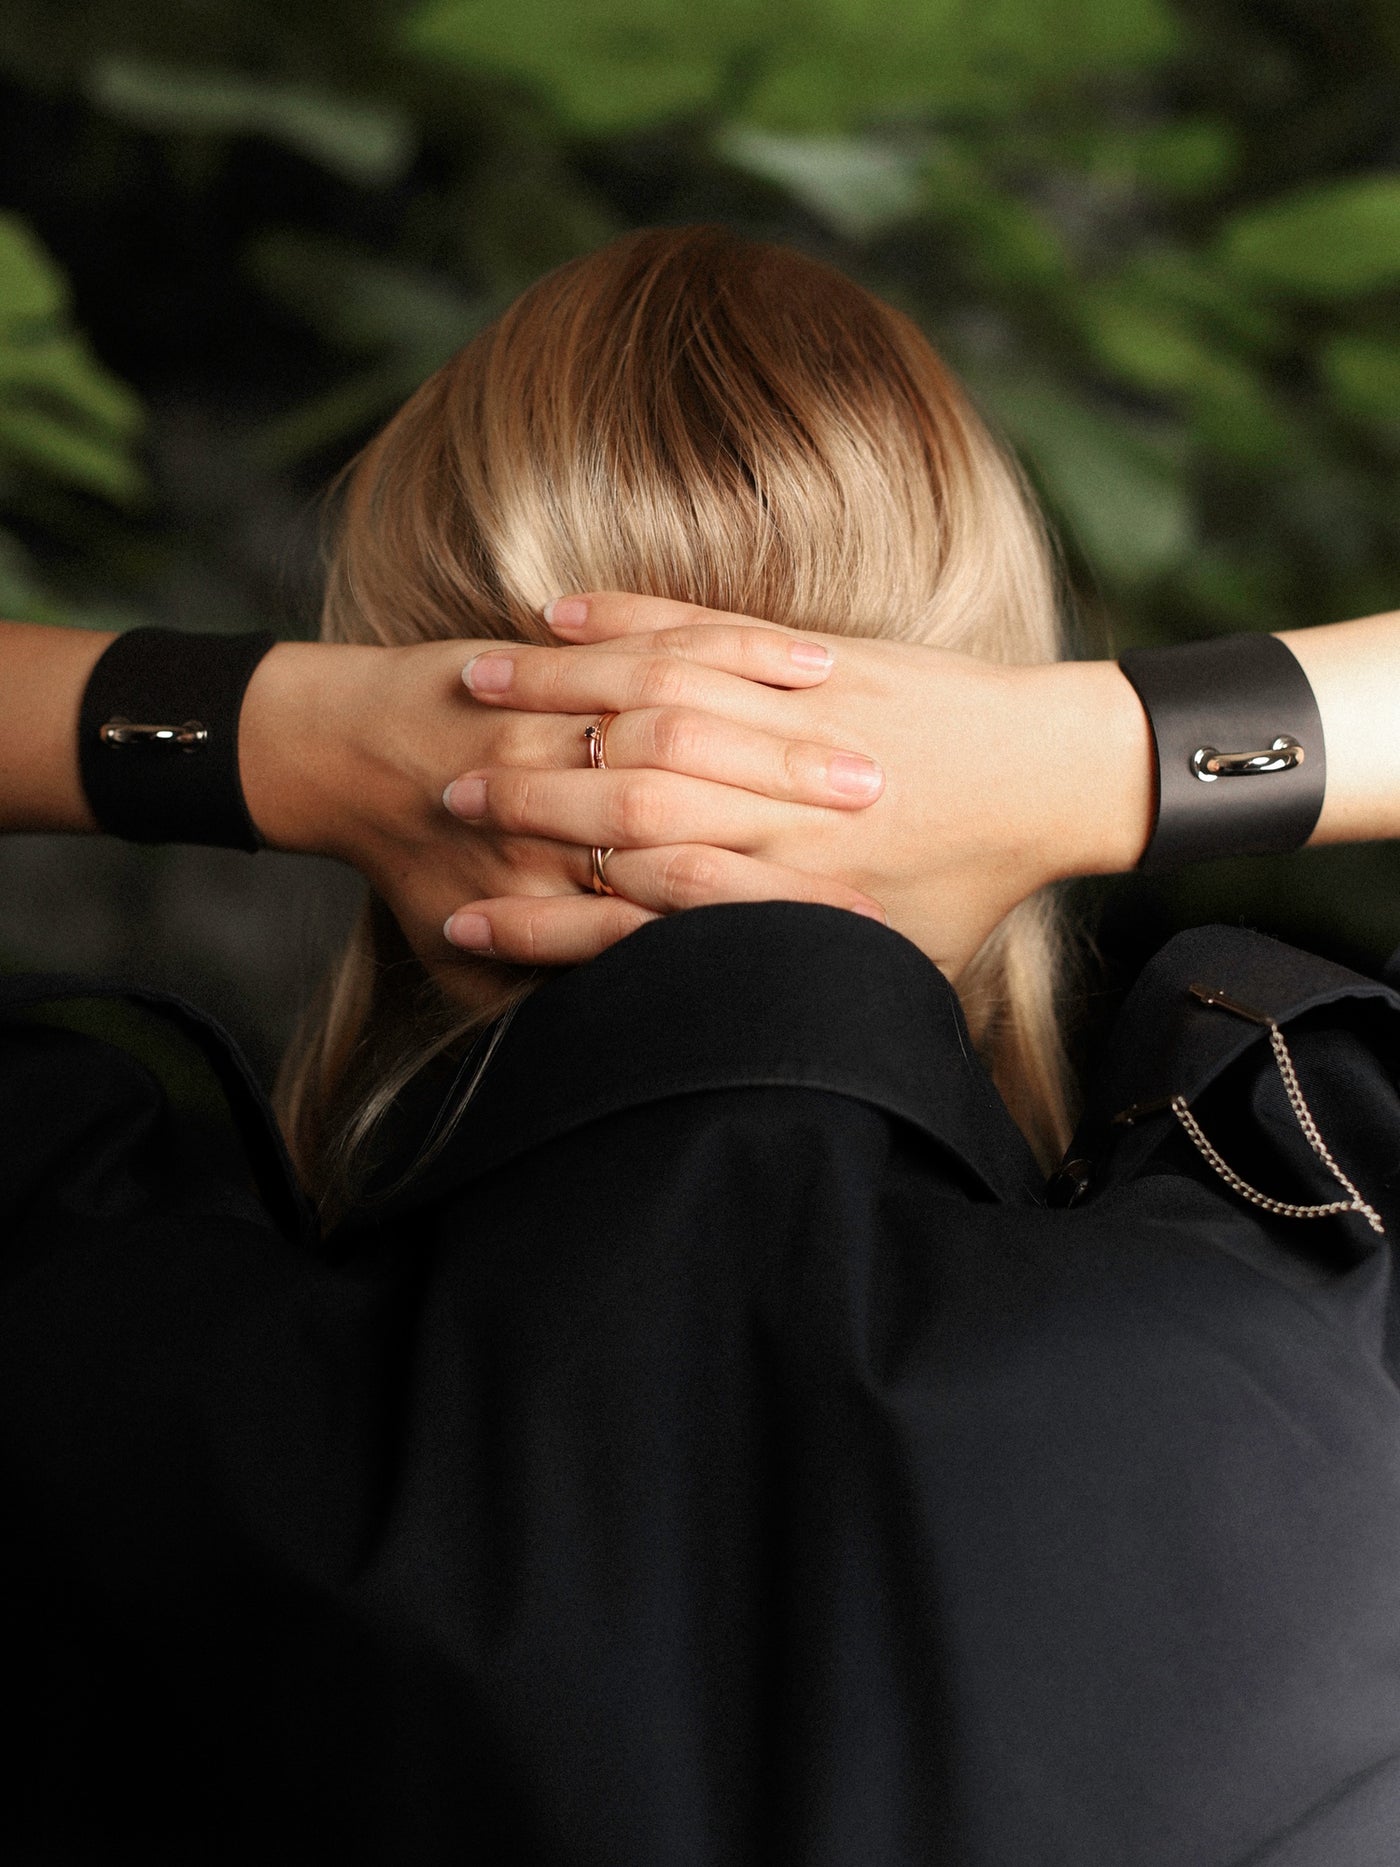 Model crossing hands above the head with a Dee cuff on each wrist